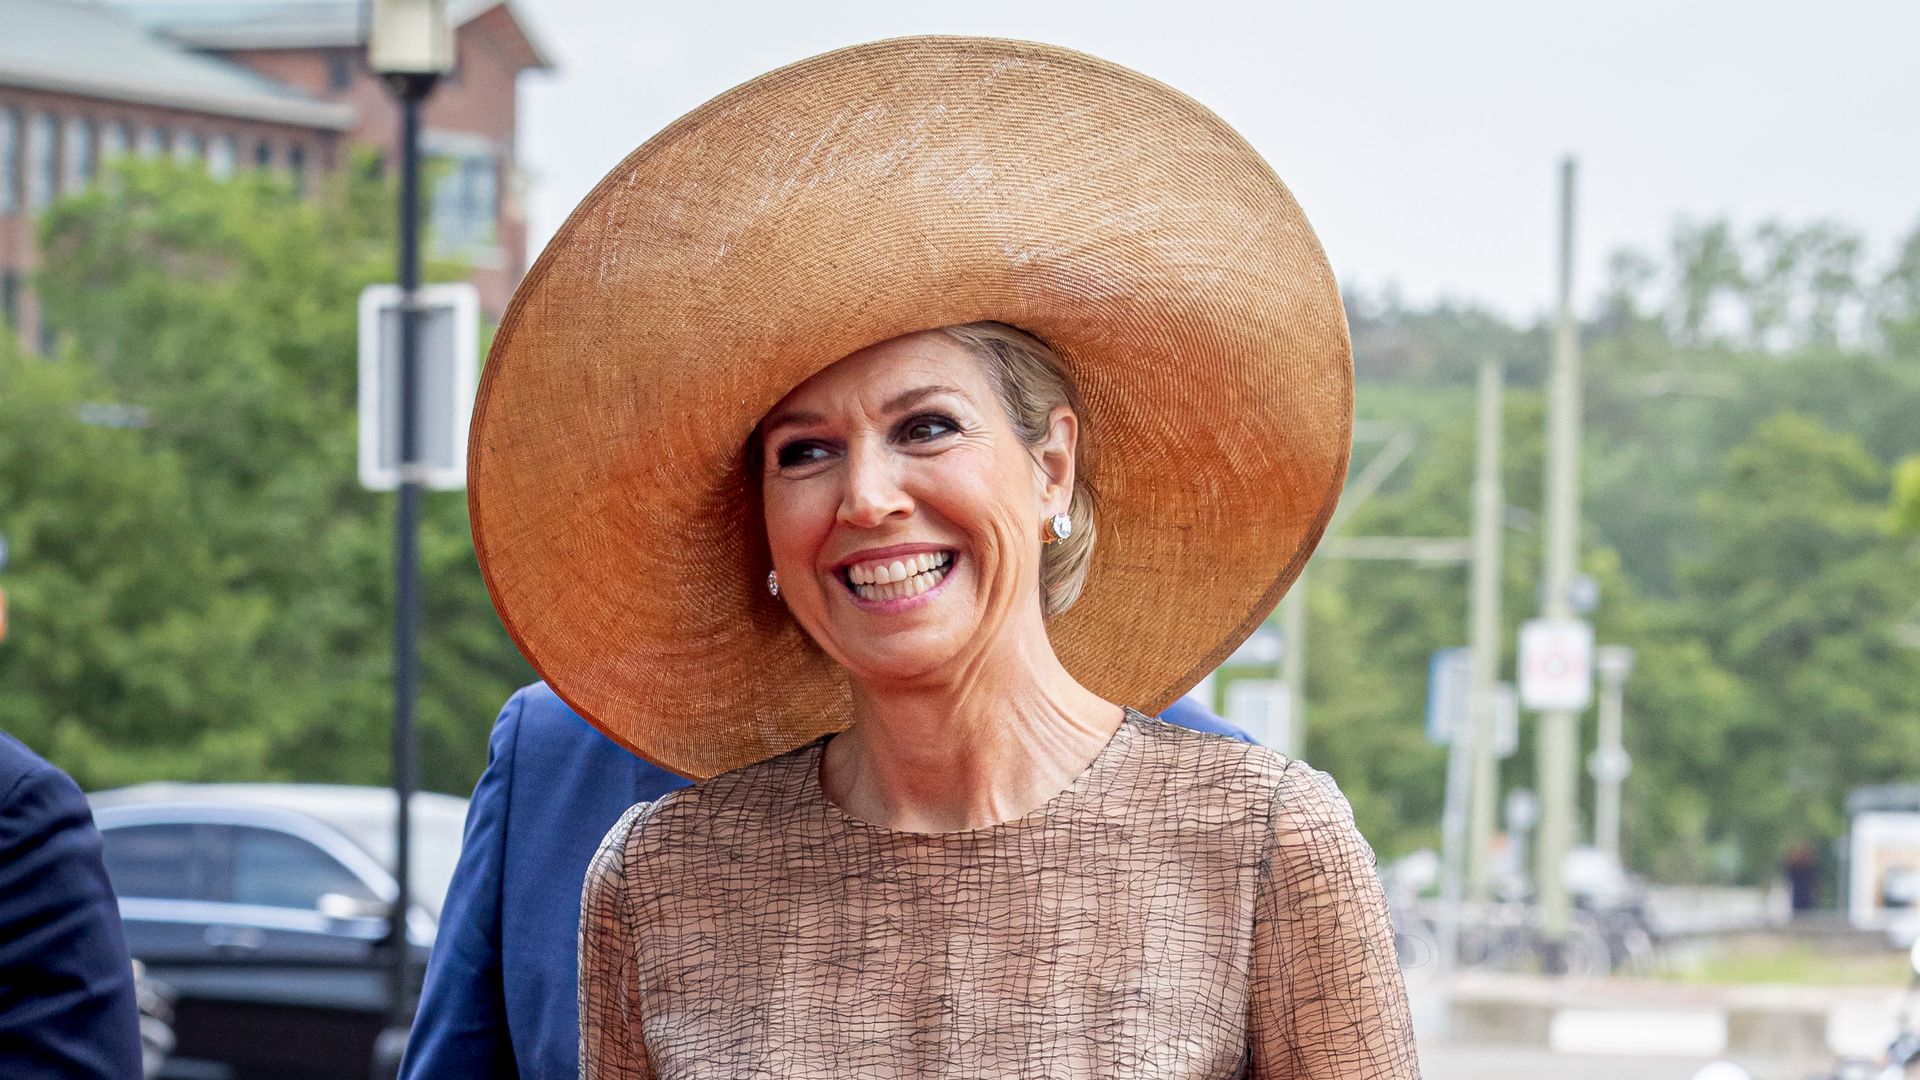 Queen Máxima exudes glamour in waist-defining dress and sky-high heels